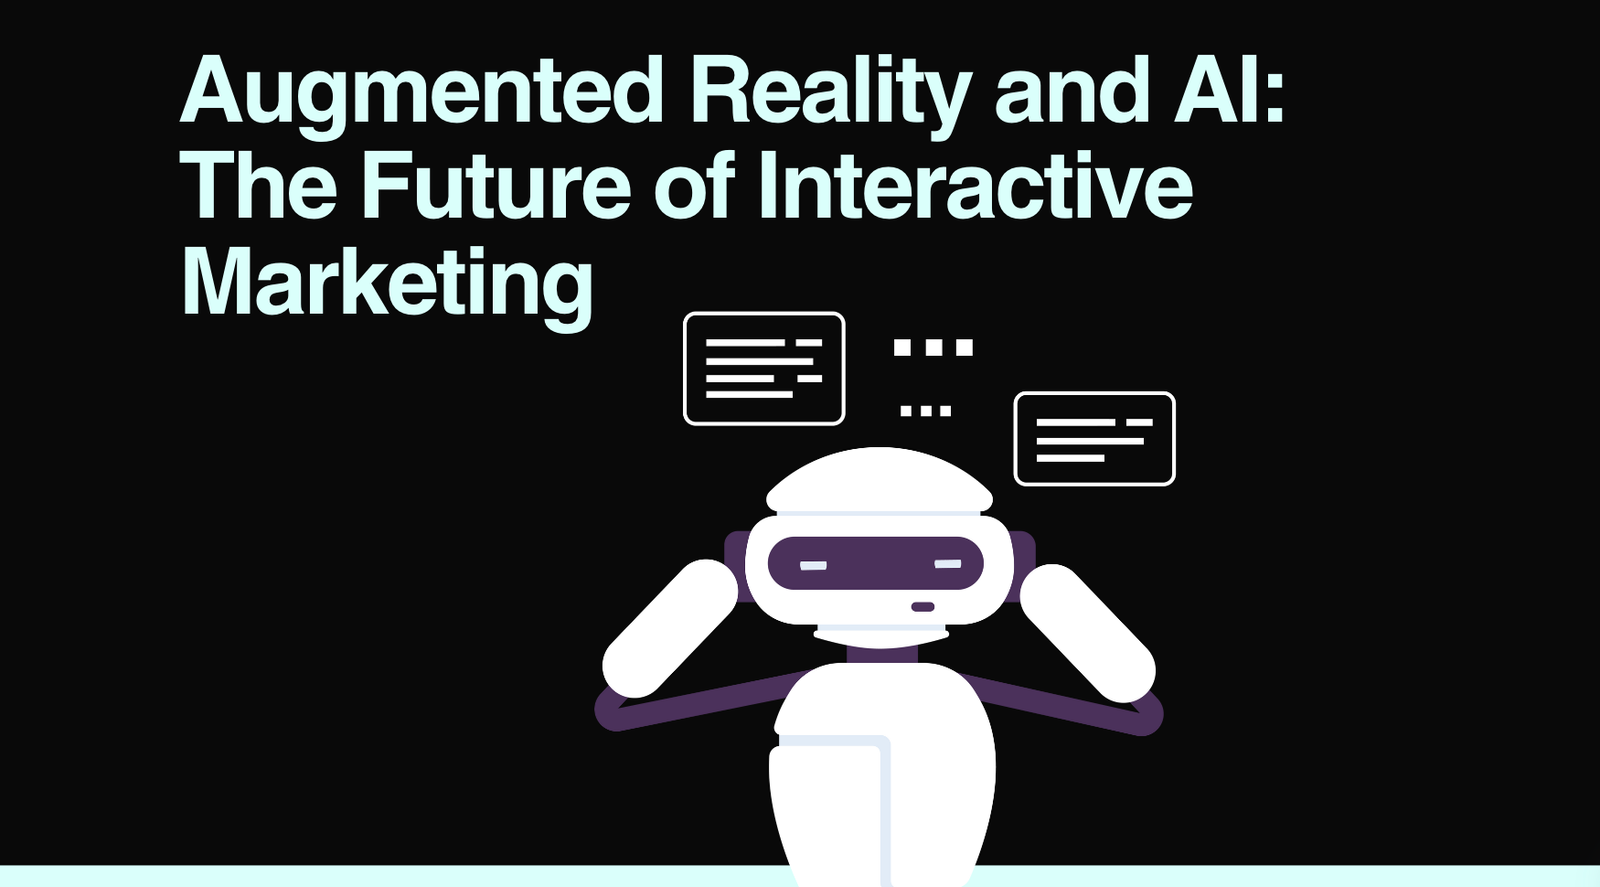 Augmented Reality and AI: The Future of Interactive Marketing